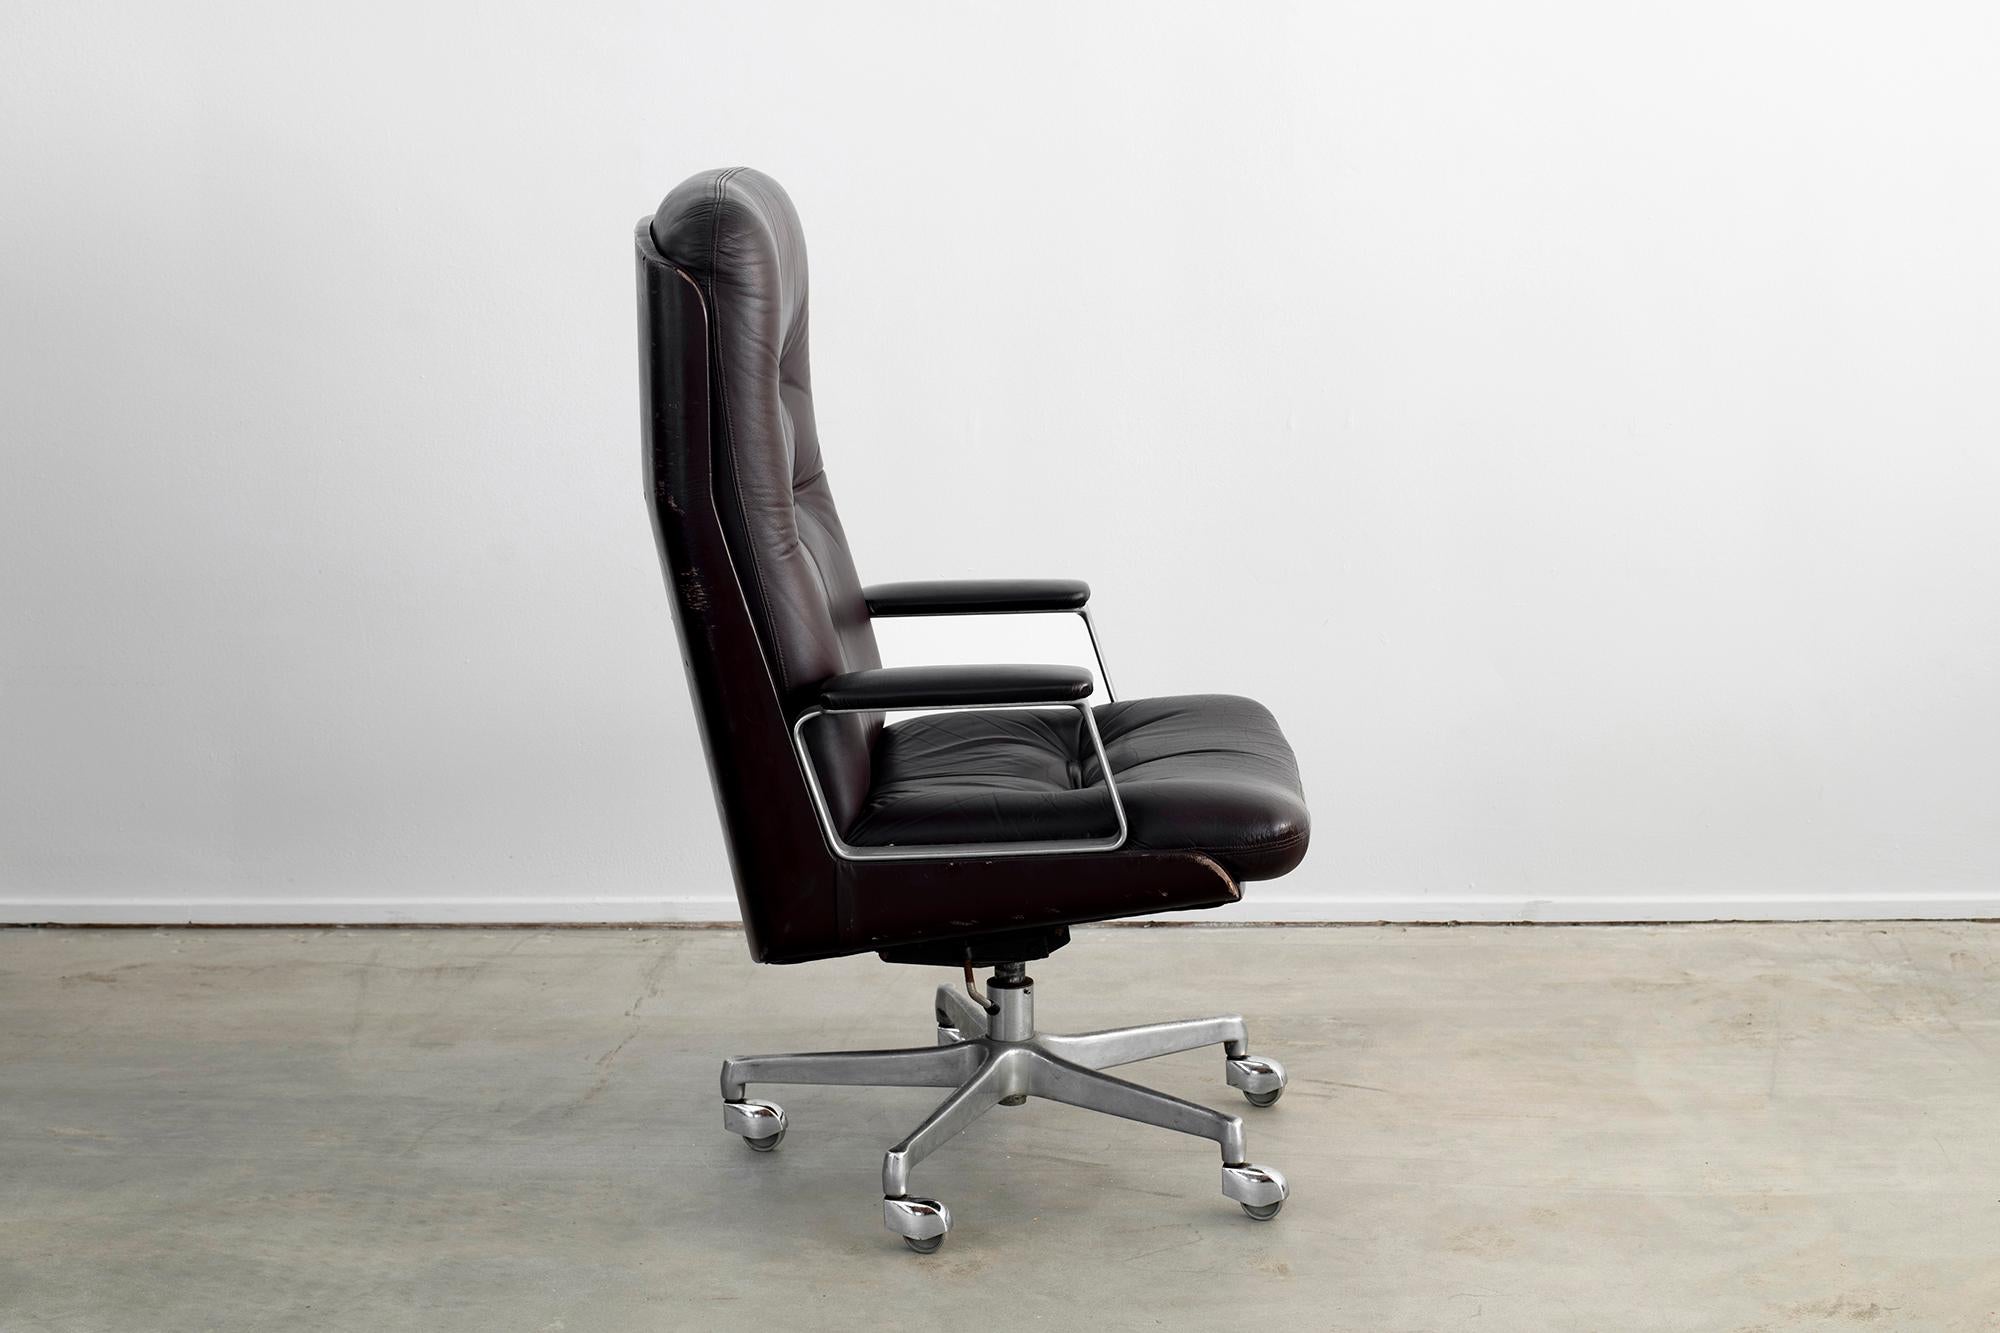 Classic Osvaldo Borsani executive desk chair in original chocolate brown leather and aluminum base and casters.